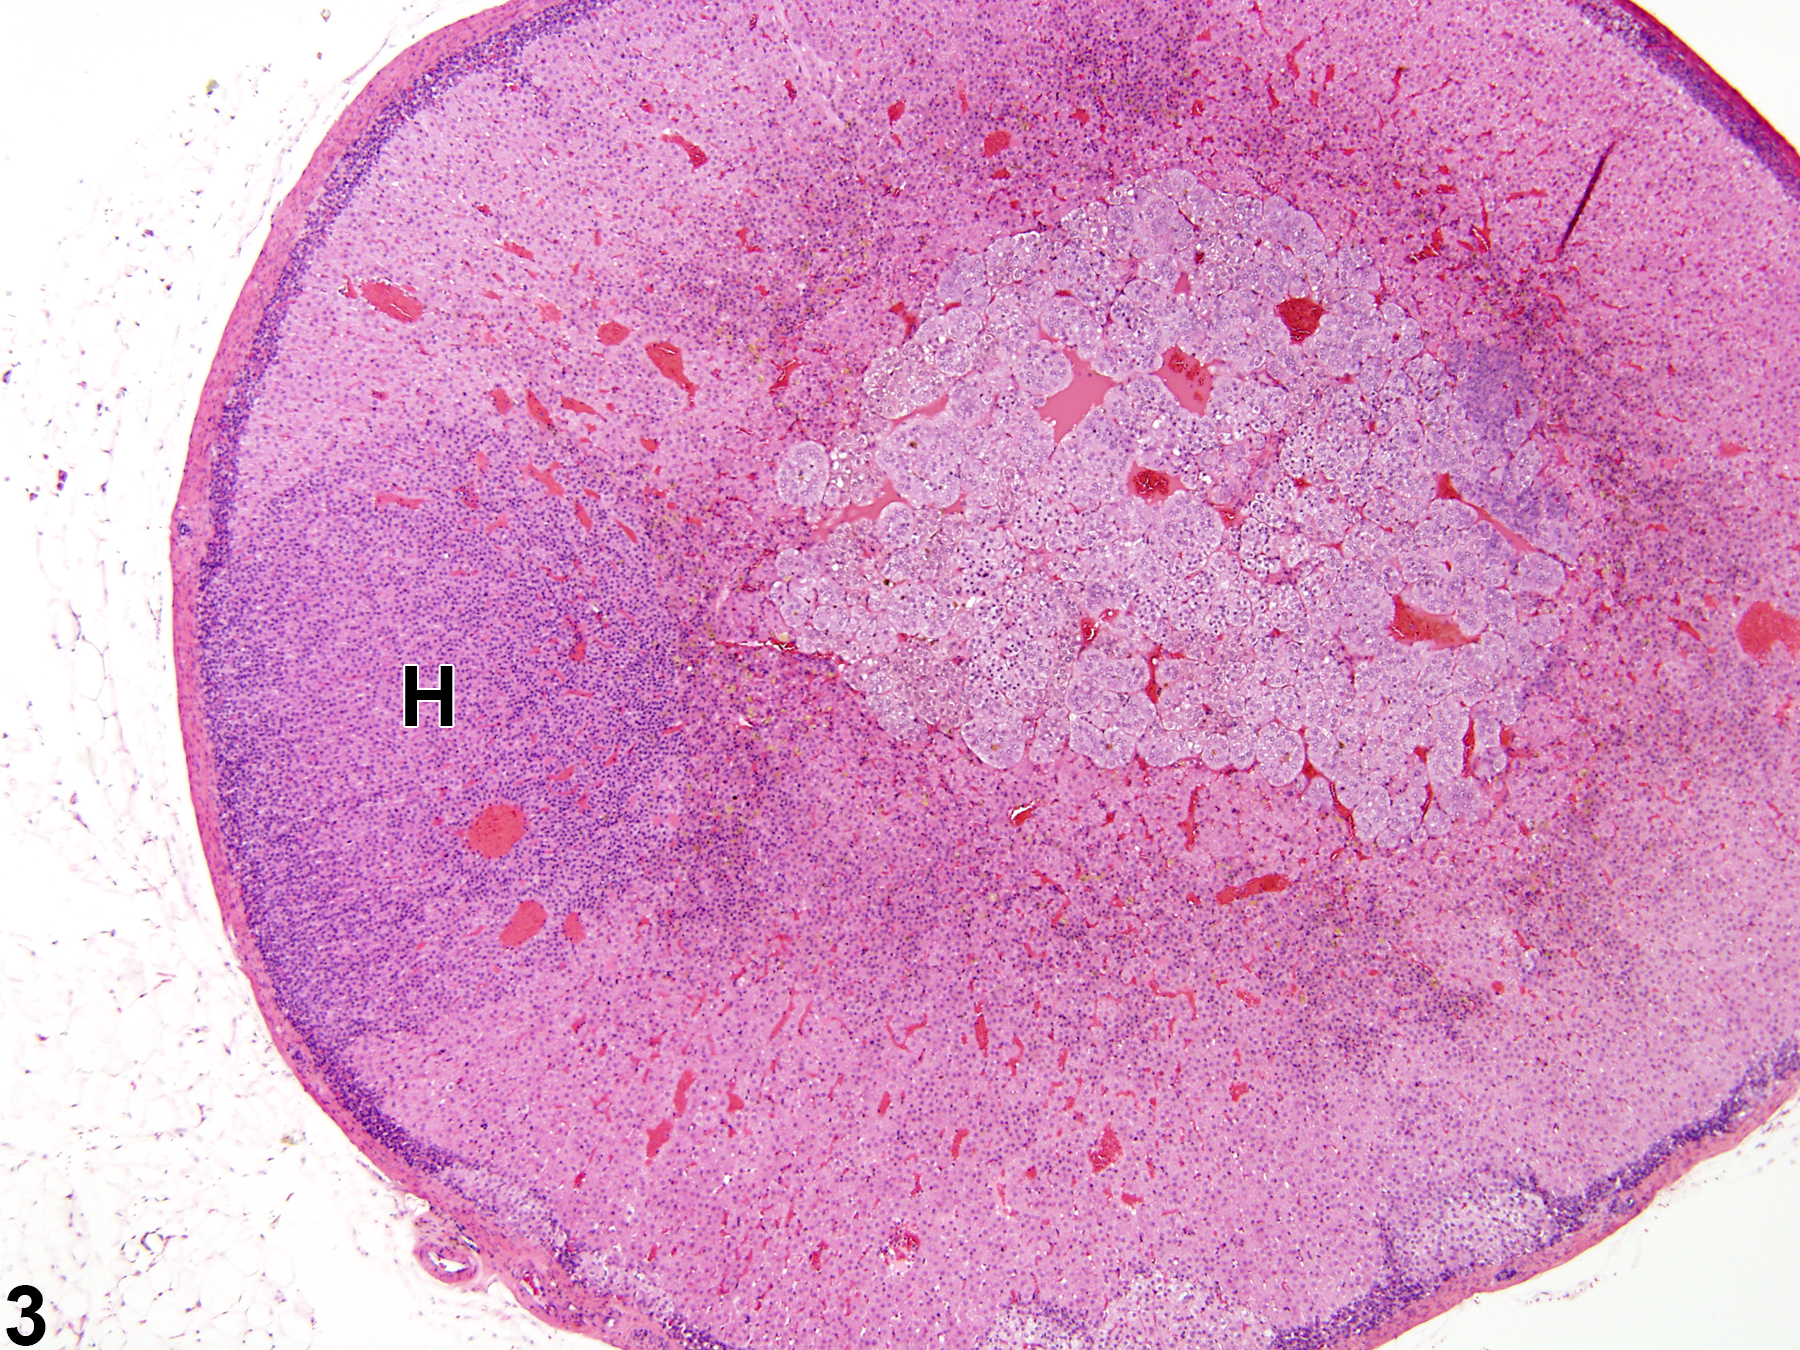 Image of hyperplasia in the adrenal gland cortex from a female Sprague-Dawley rat in a chronic study